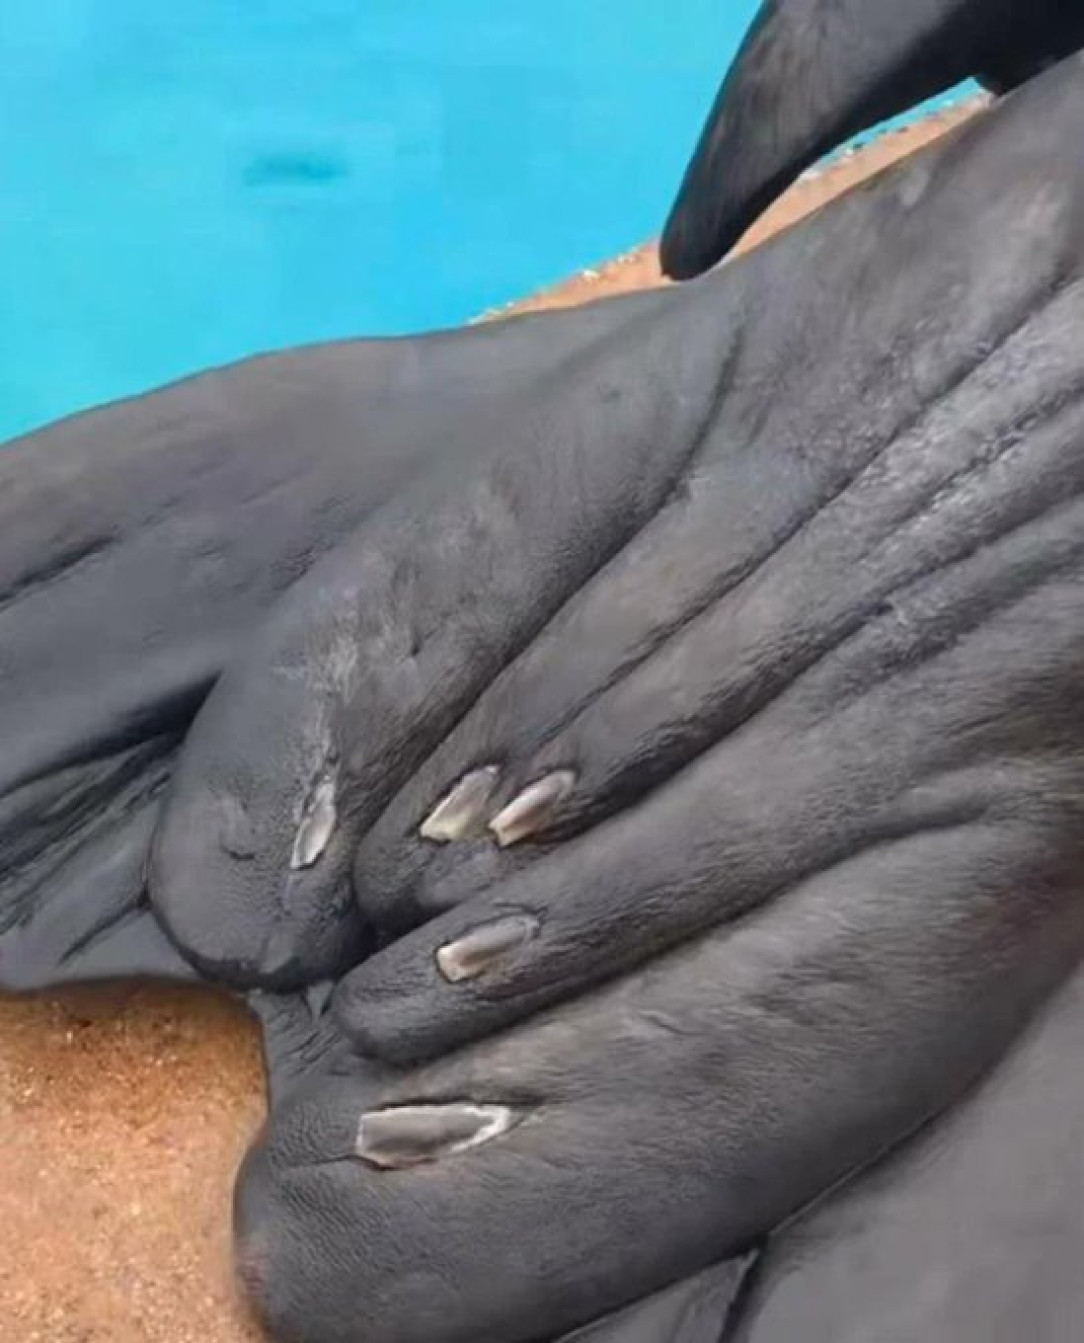 Seals and sea lions have nails